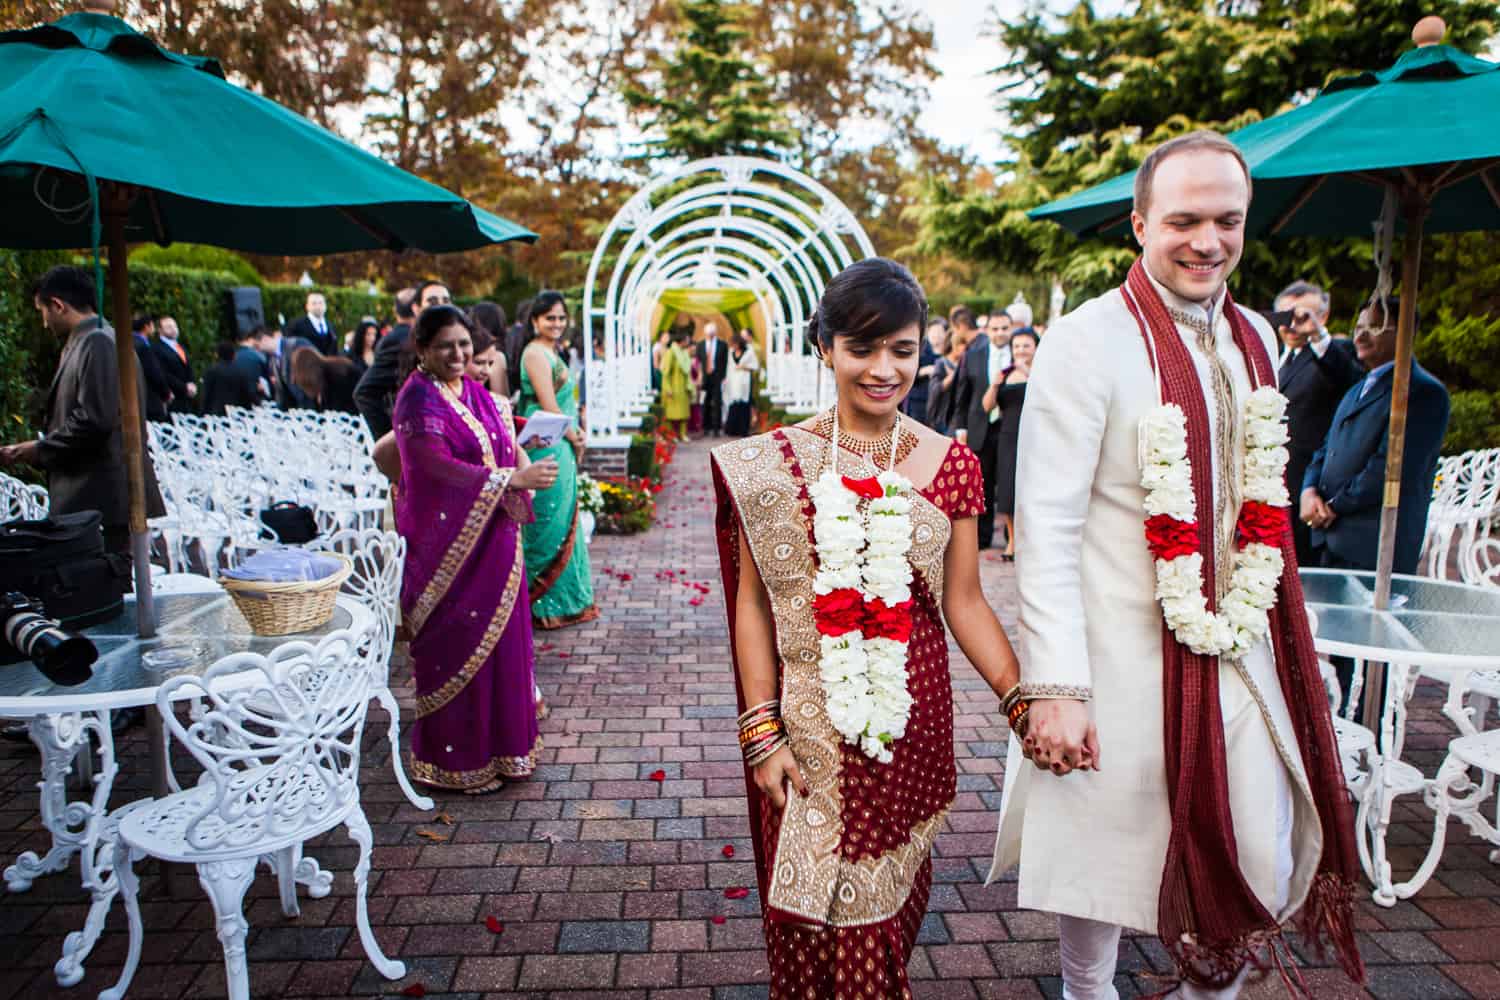 Bride and groom recessing after traditional Hindu wedding ceremony at an East Wind Inn wedding